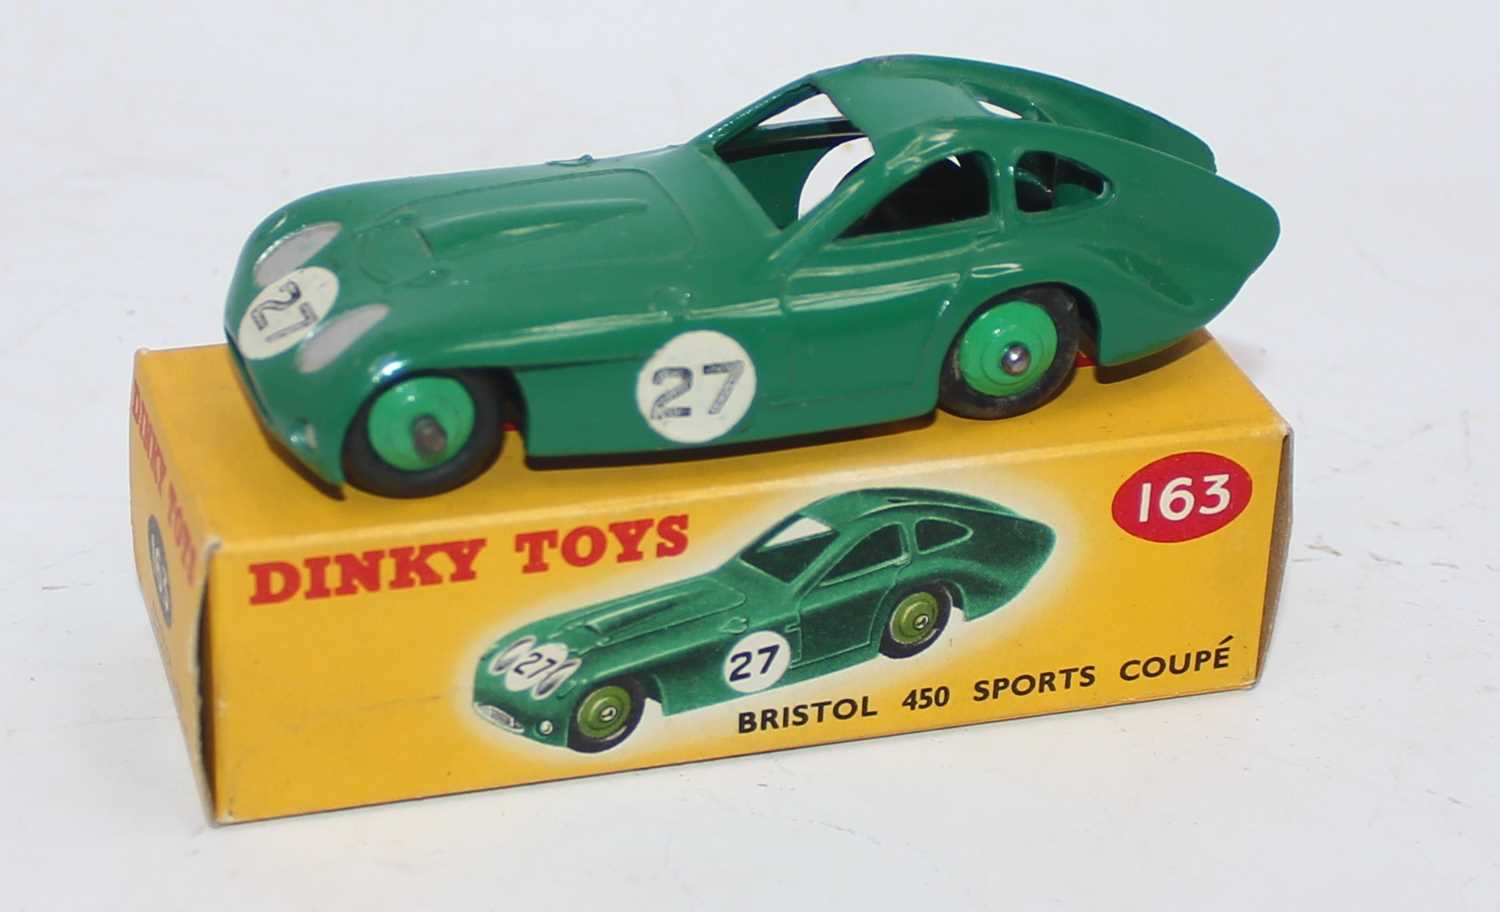 Dinky Toys 163 Bristol 450 Sports Coupe. In dark green with mid green wheels and black tyres